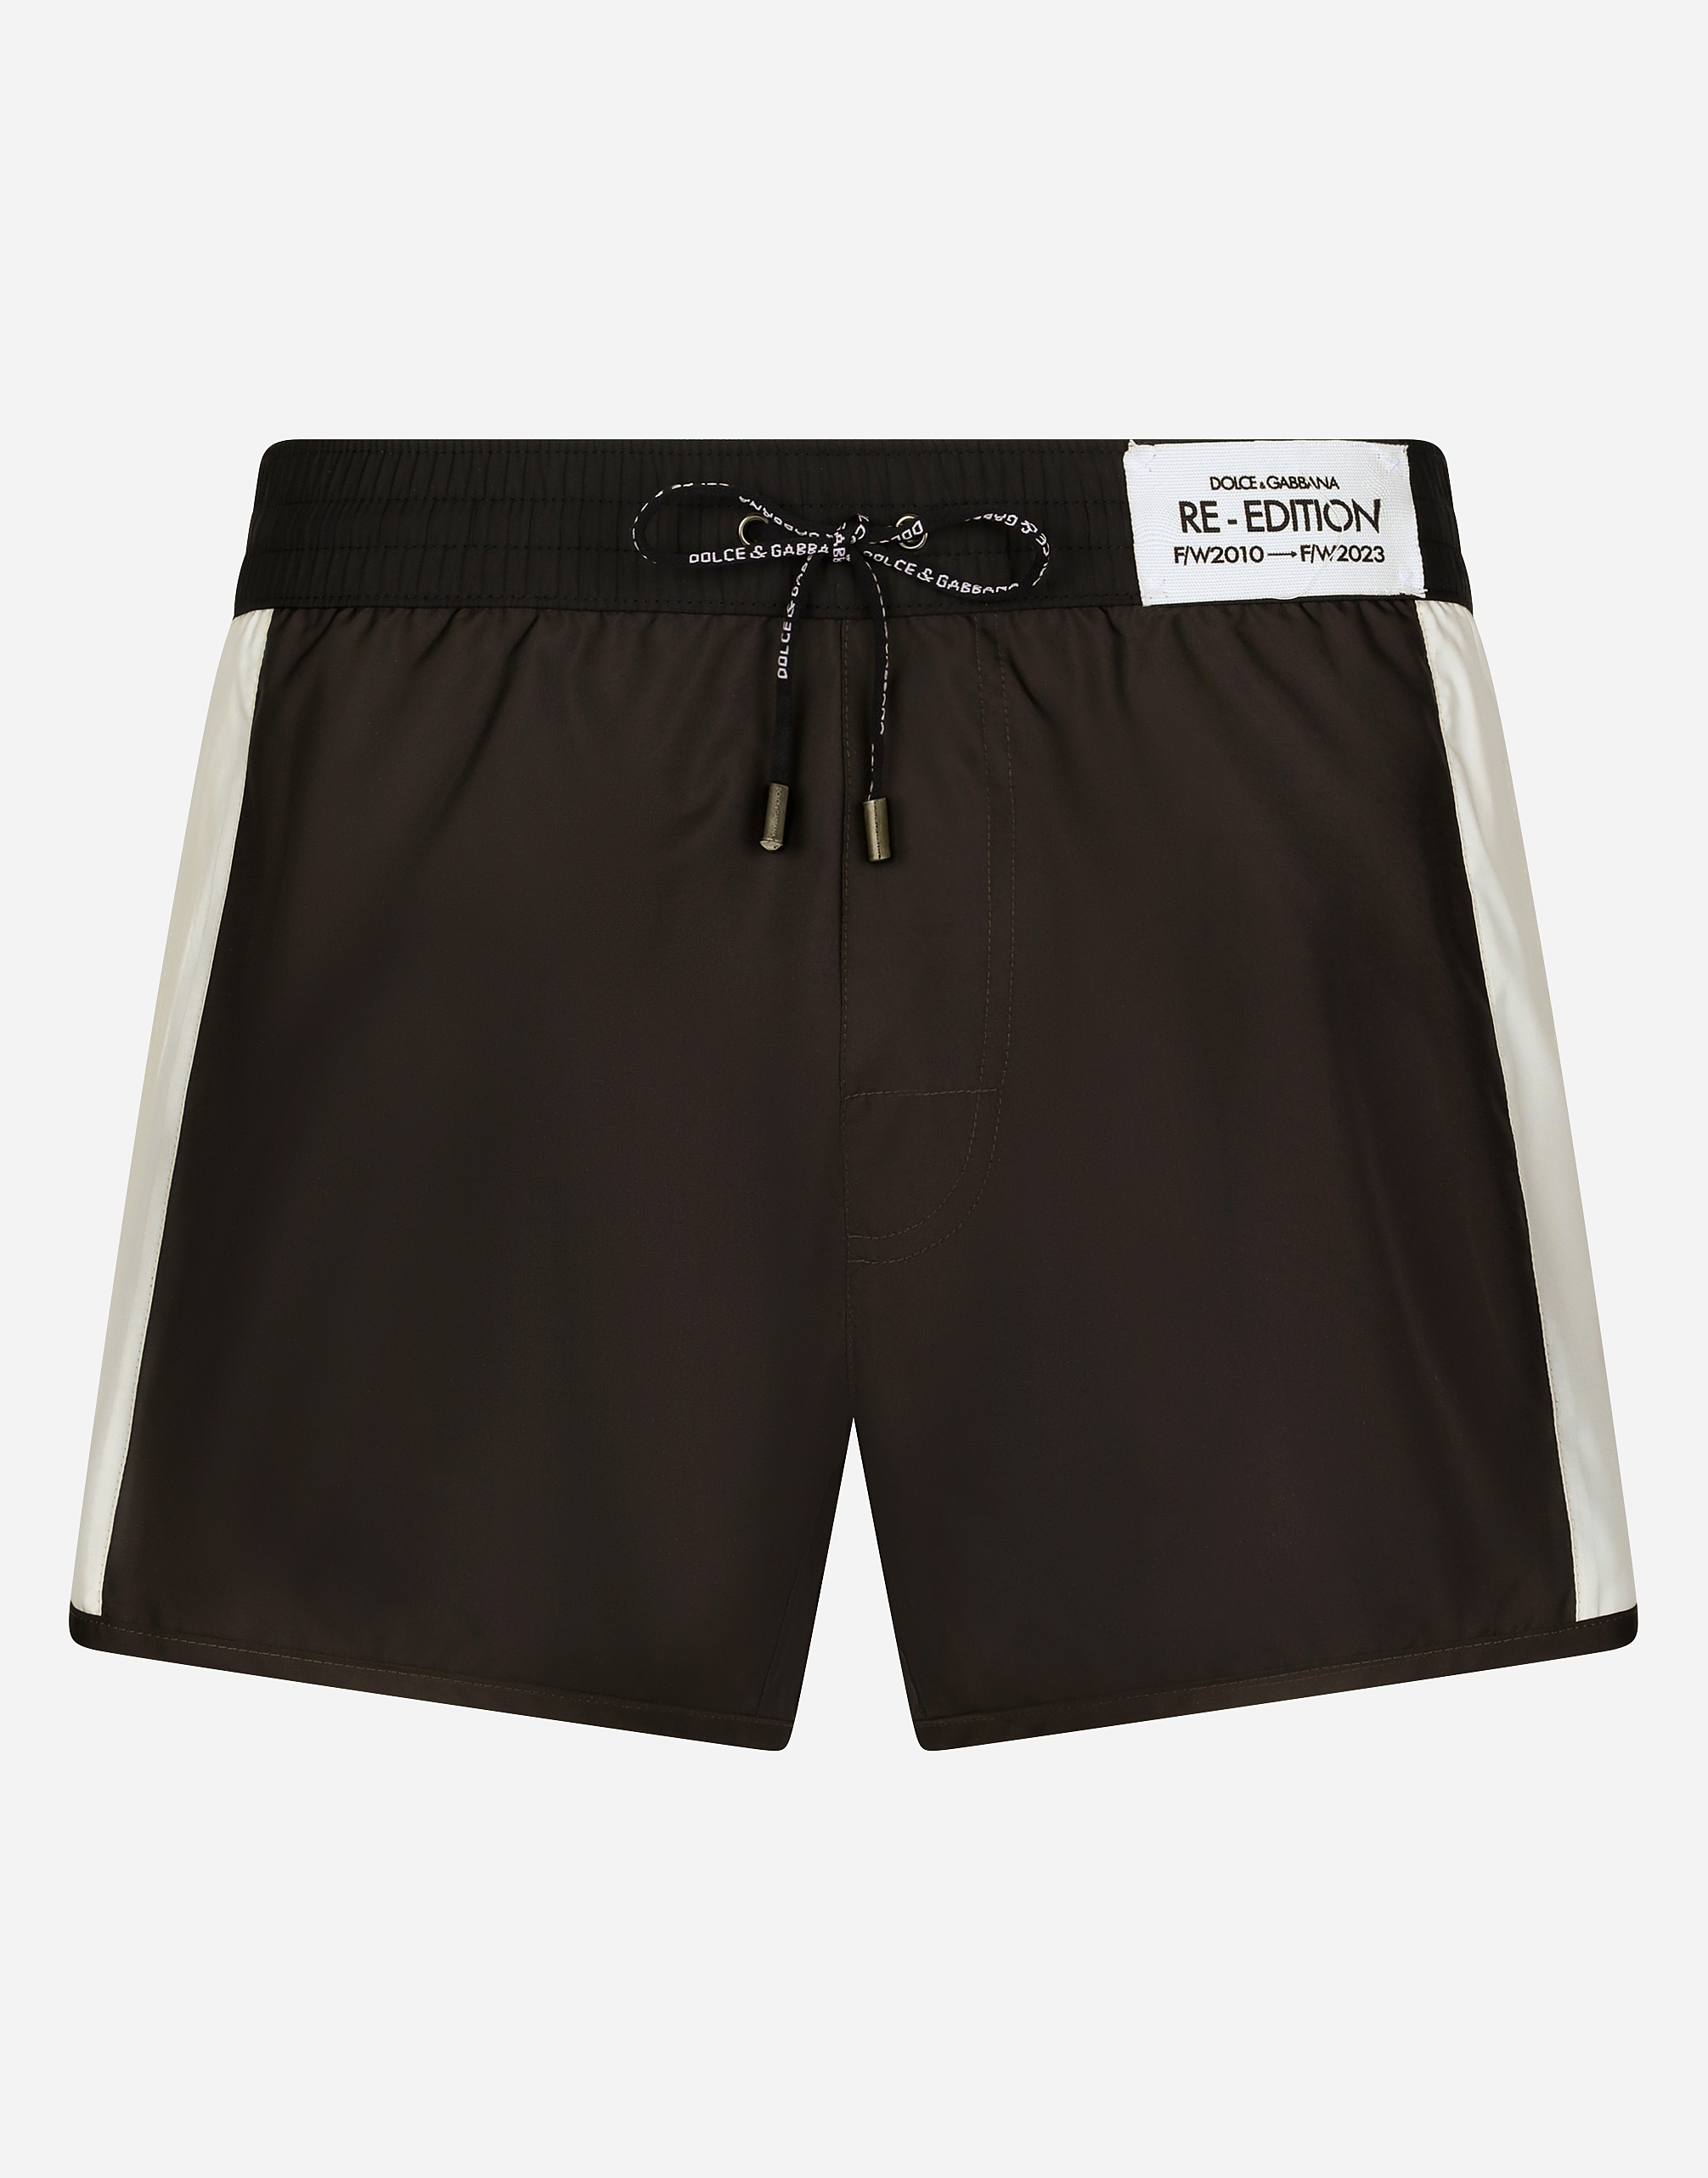 Dolce & Gabbana Swim Shorts With Contrasting Band In Multicolor